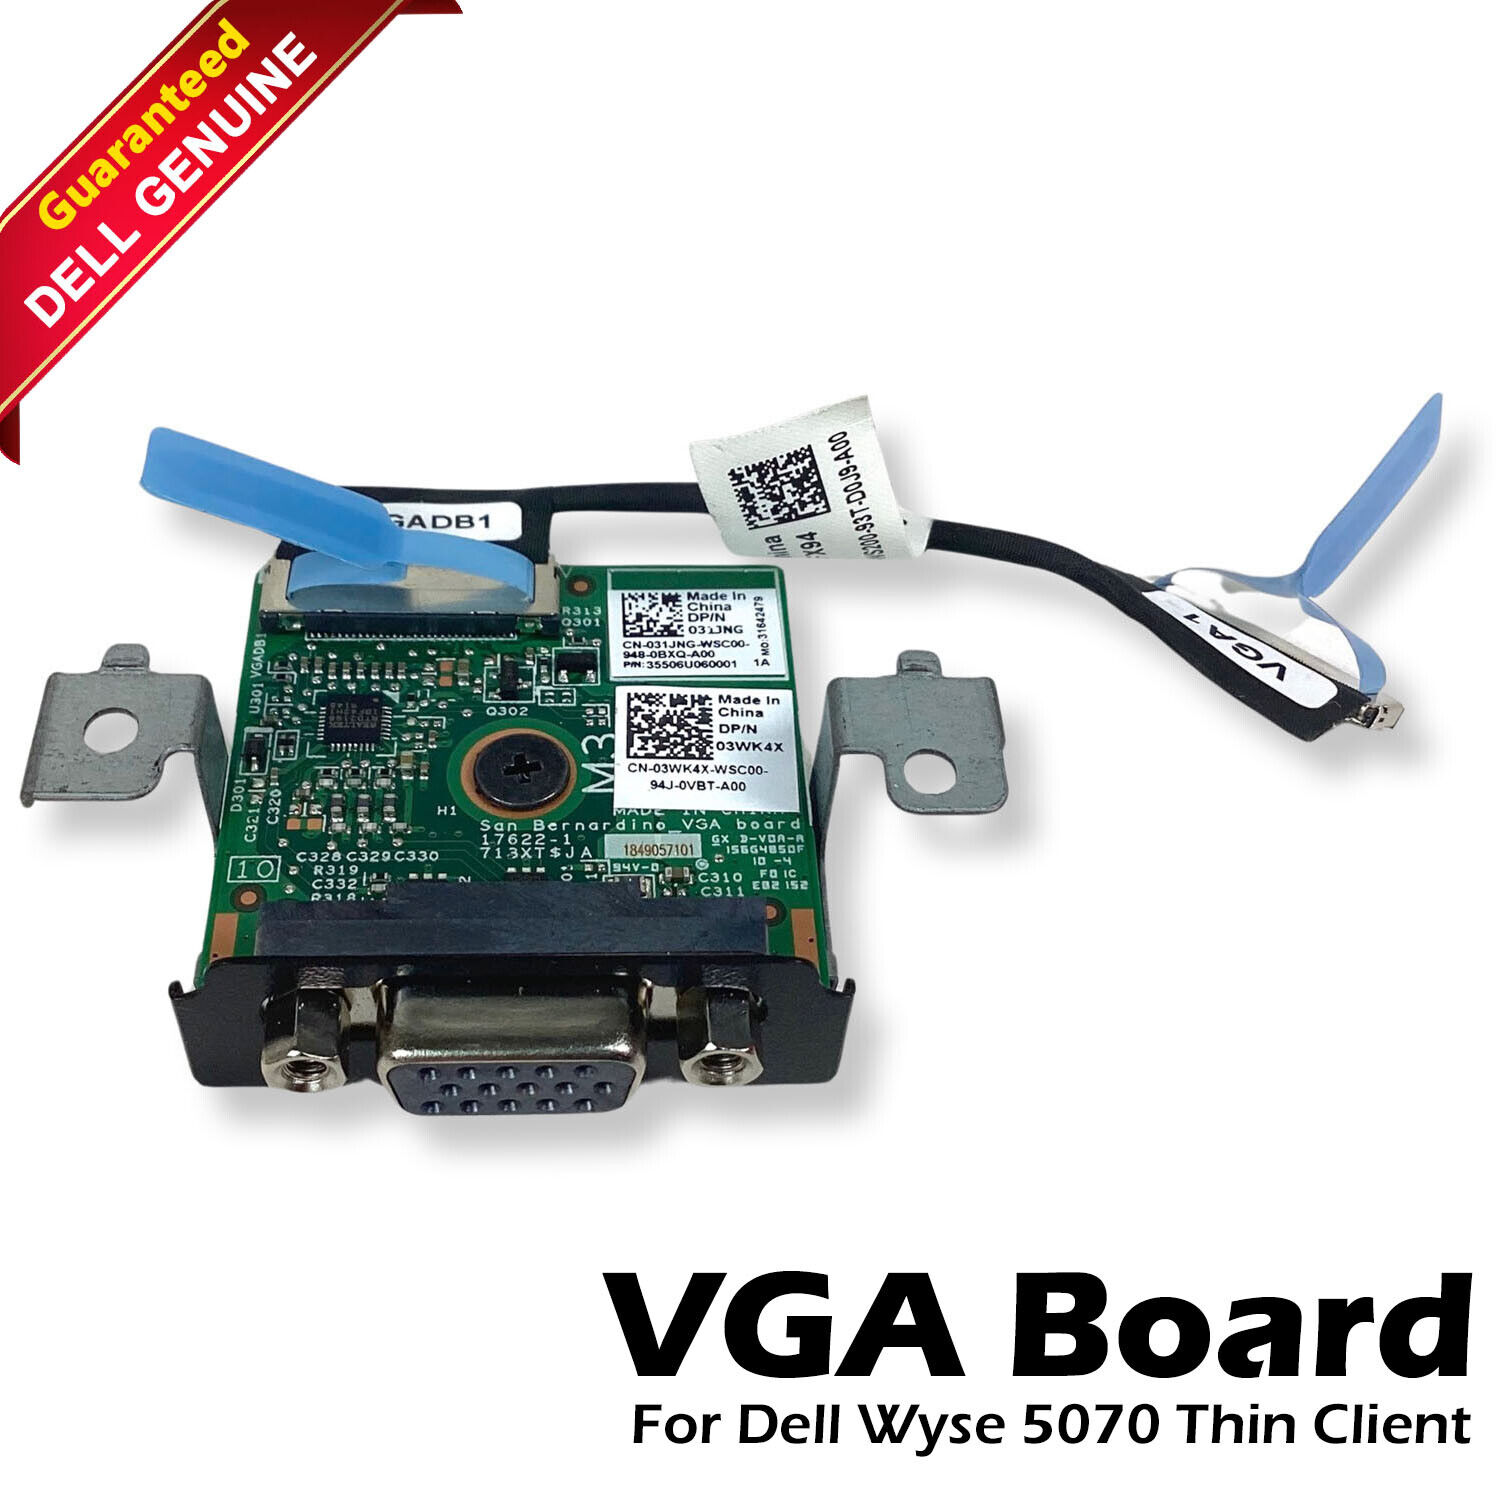 New Dell OEM Wyse 5070 Thin Client VGA Board w/ Bracket+Cable IVA01 CFX94 3WK4X